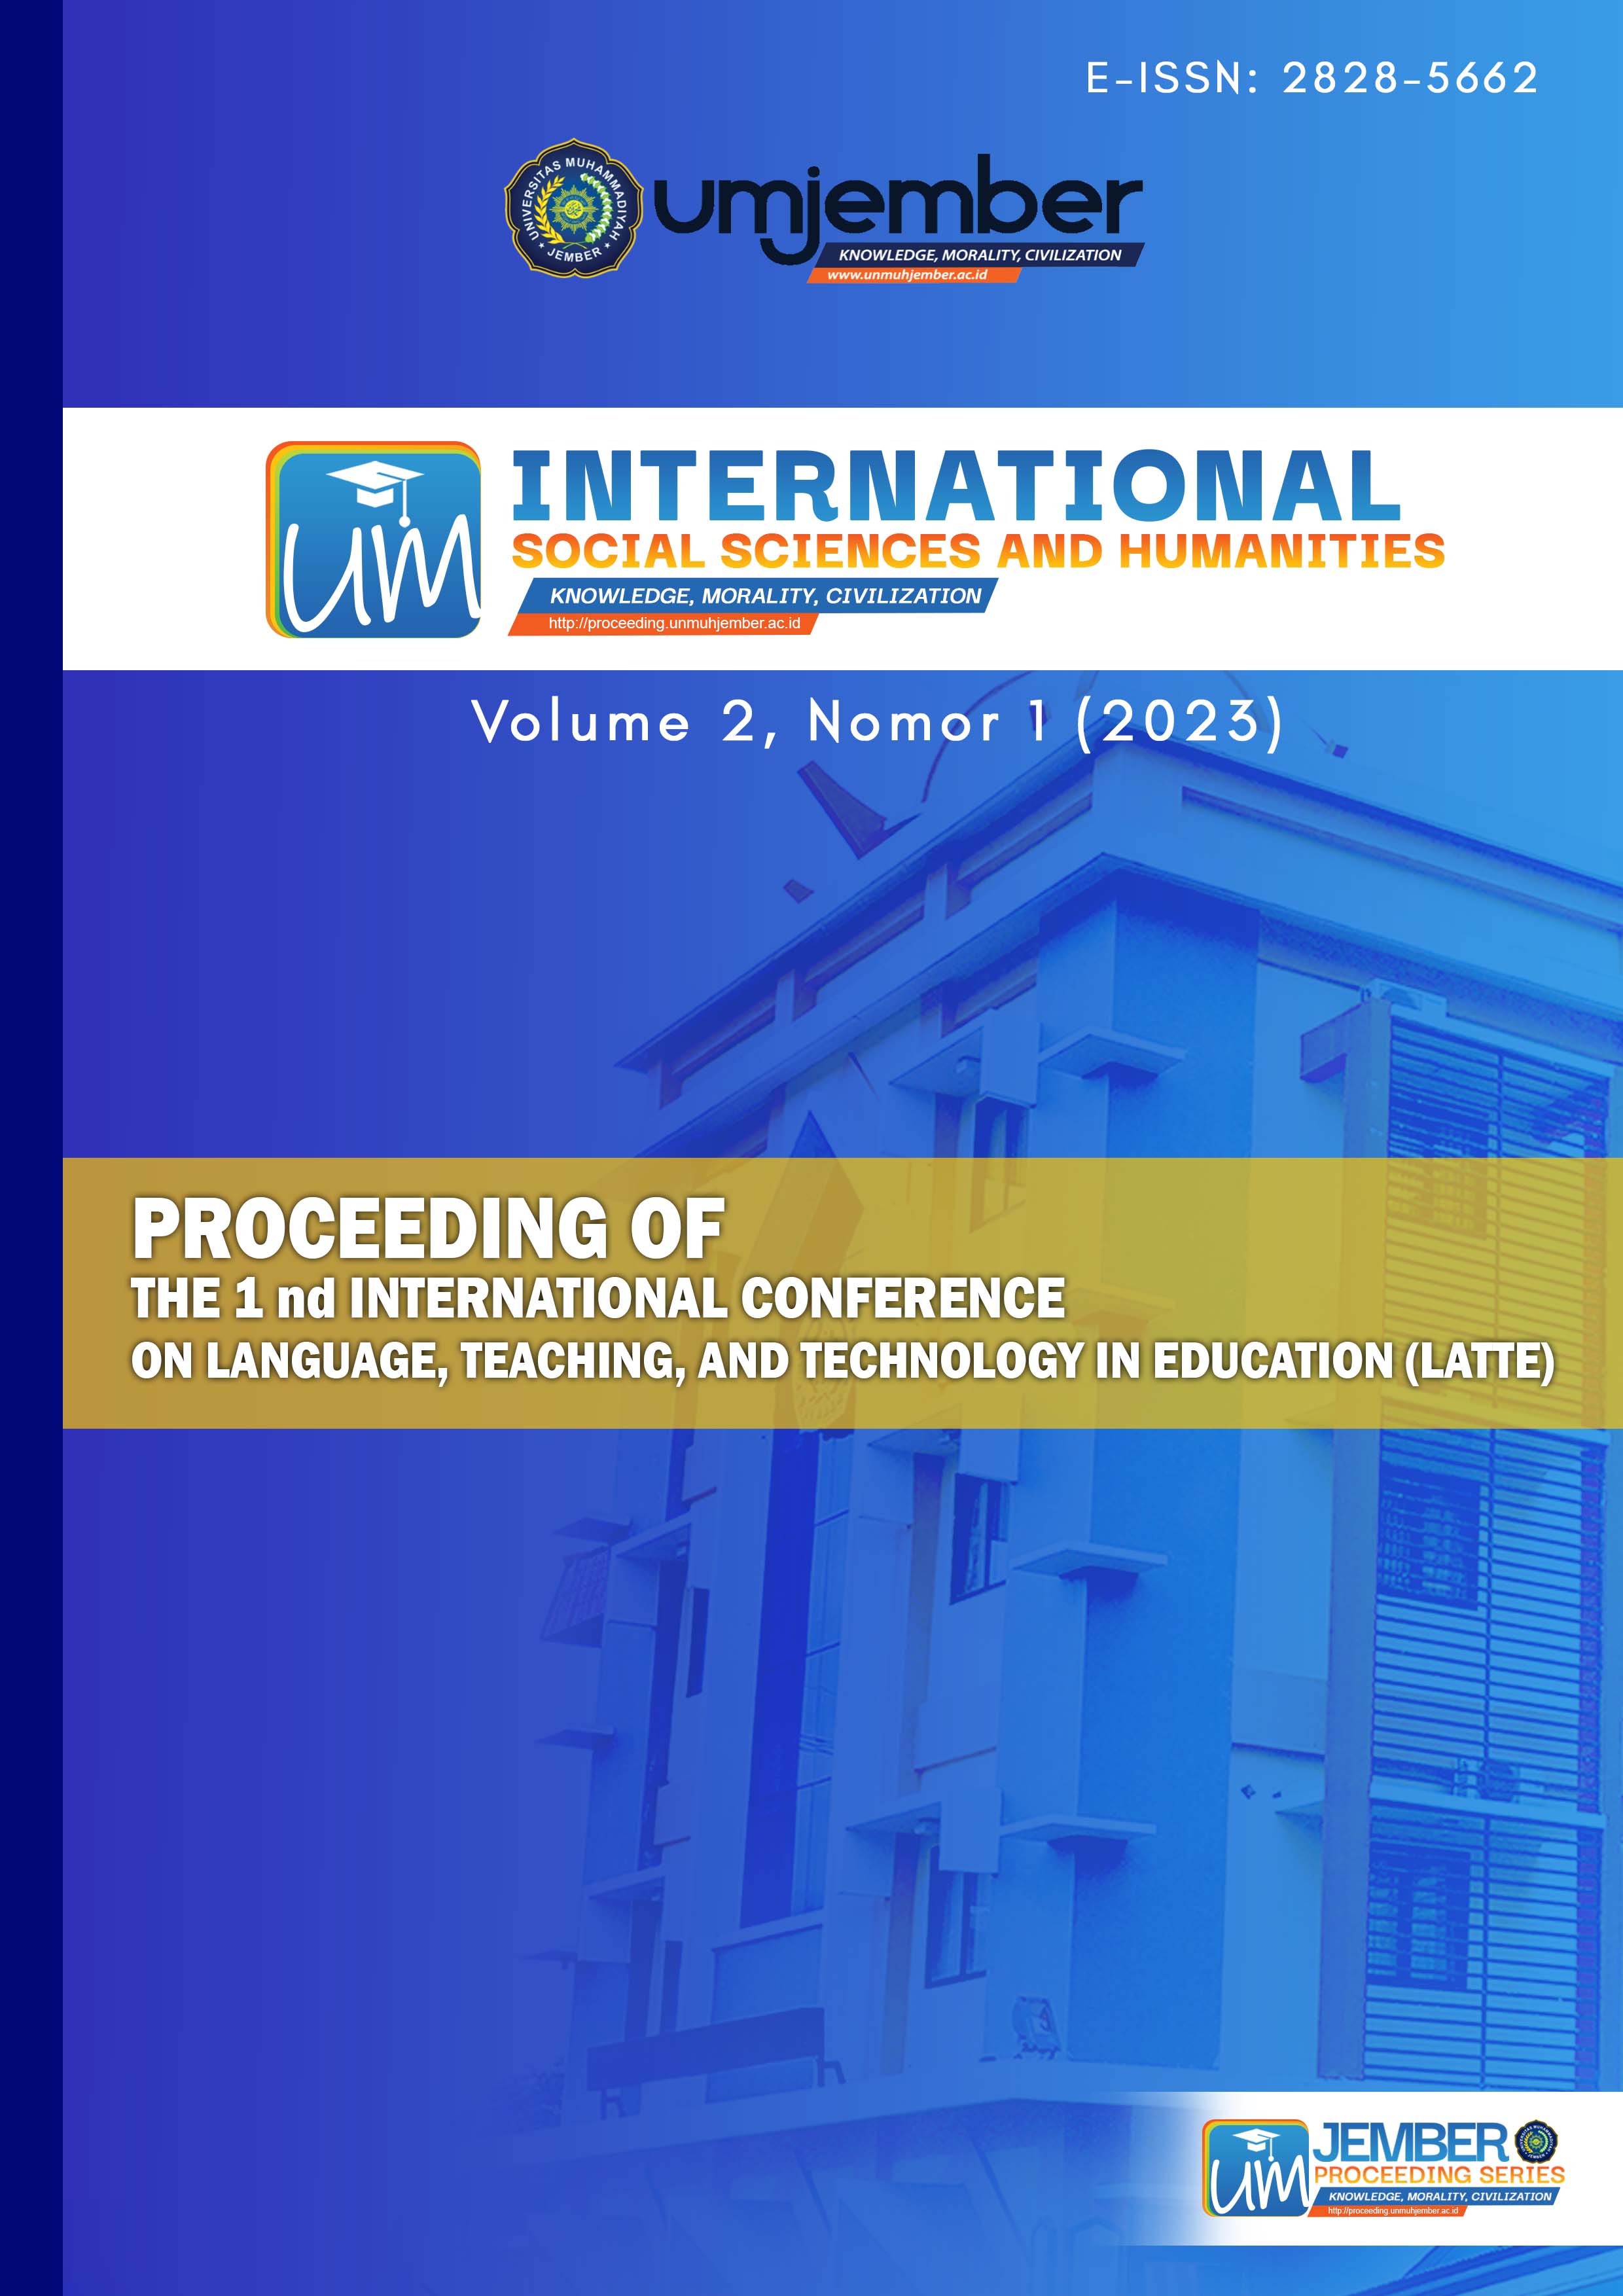 					View Vol. 2 No. 1 (2023): Proceedings of International Conference On Language, Teaching, And Technology In Education (LATTE)
				